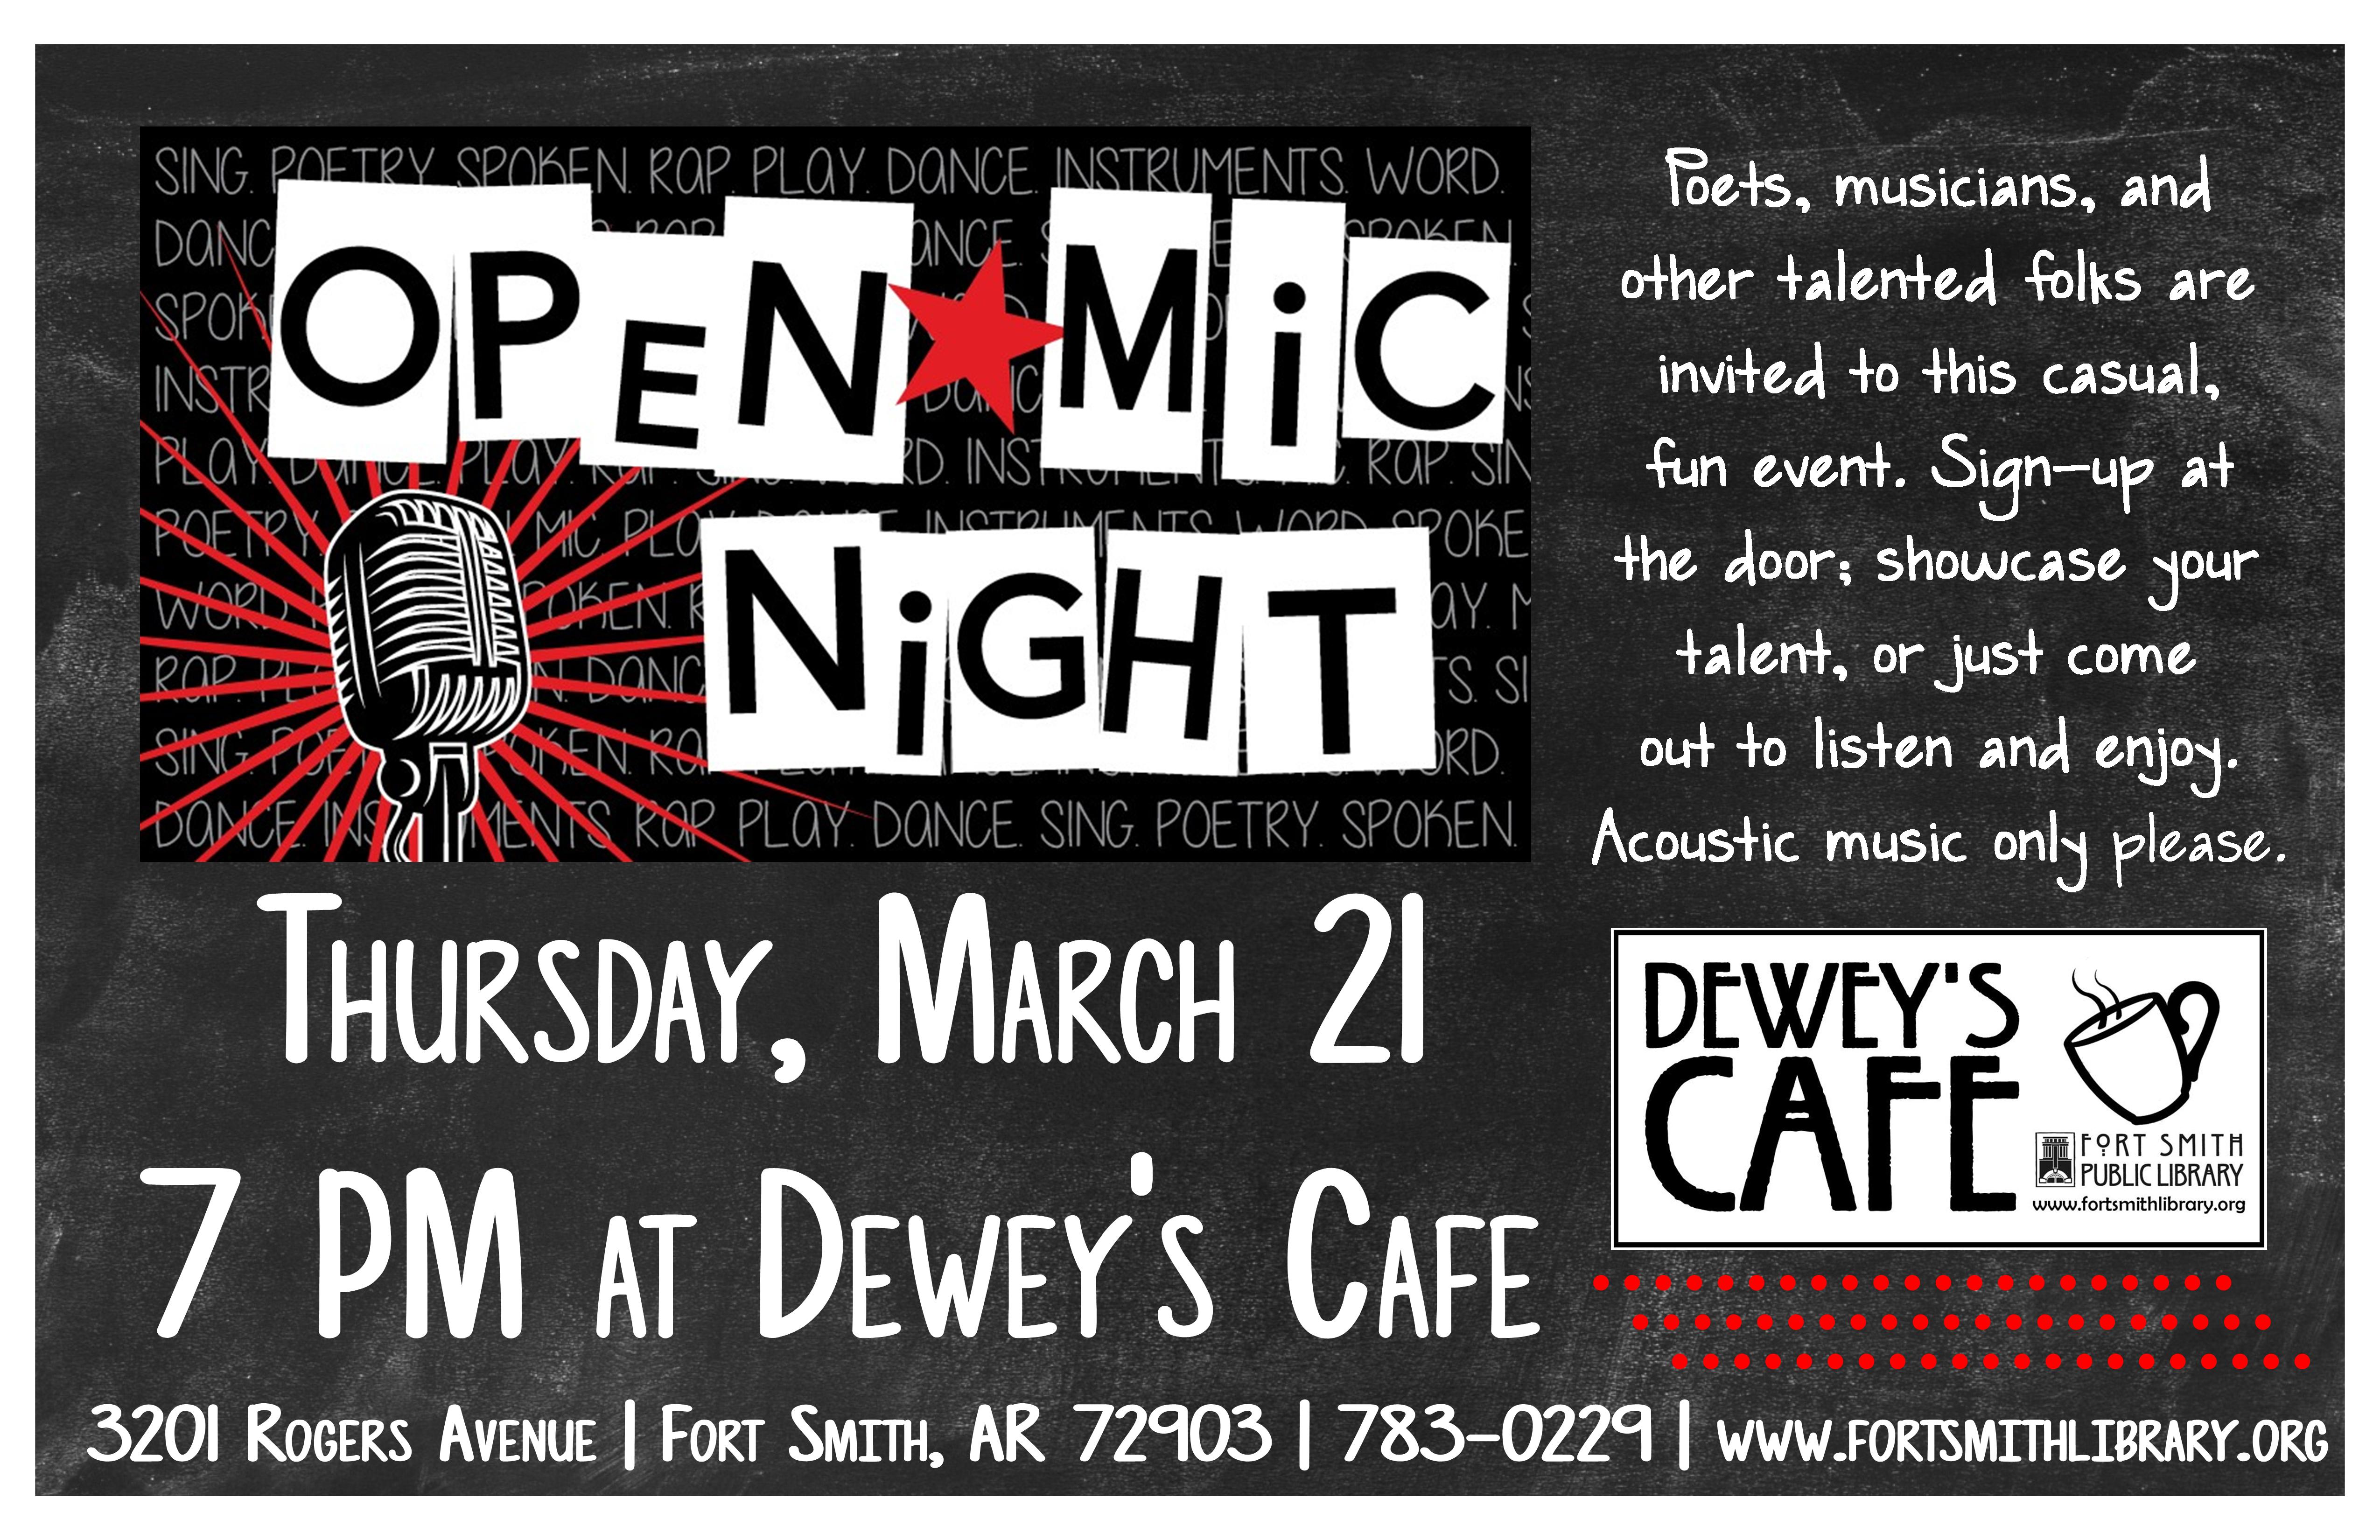 poster of open mic night event